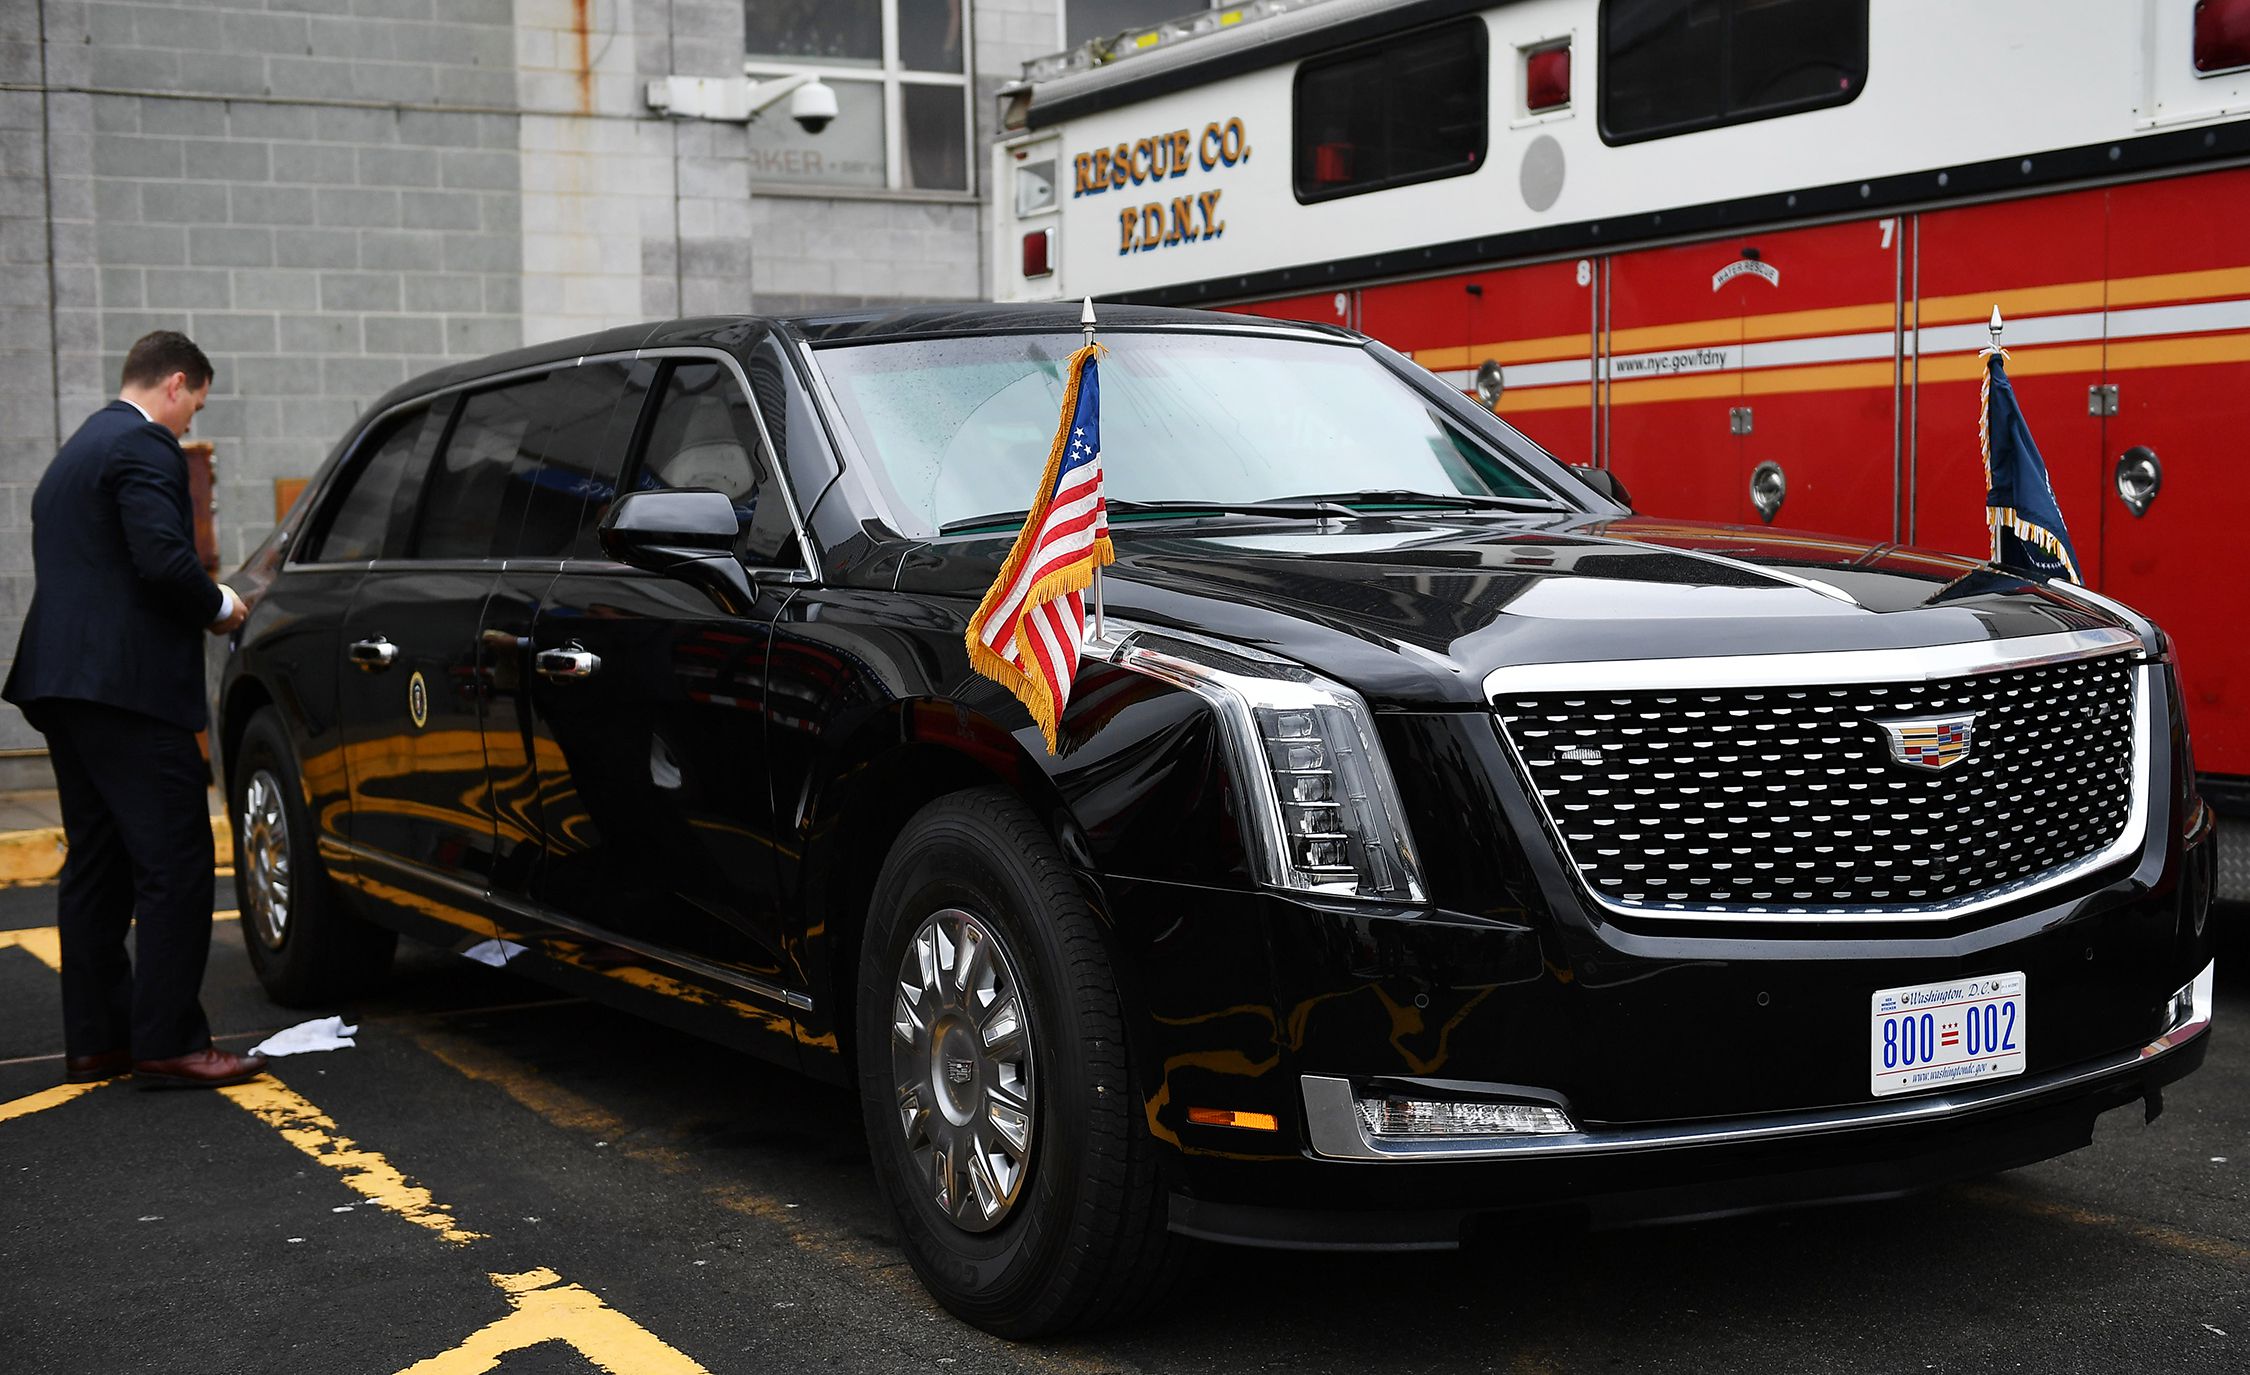 trump-cadillac-beast-presidential-limo-front-close-1537799653.jpg